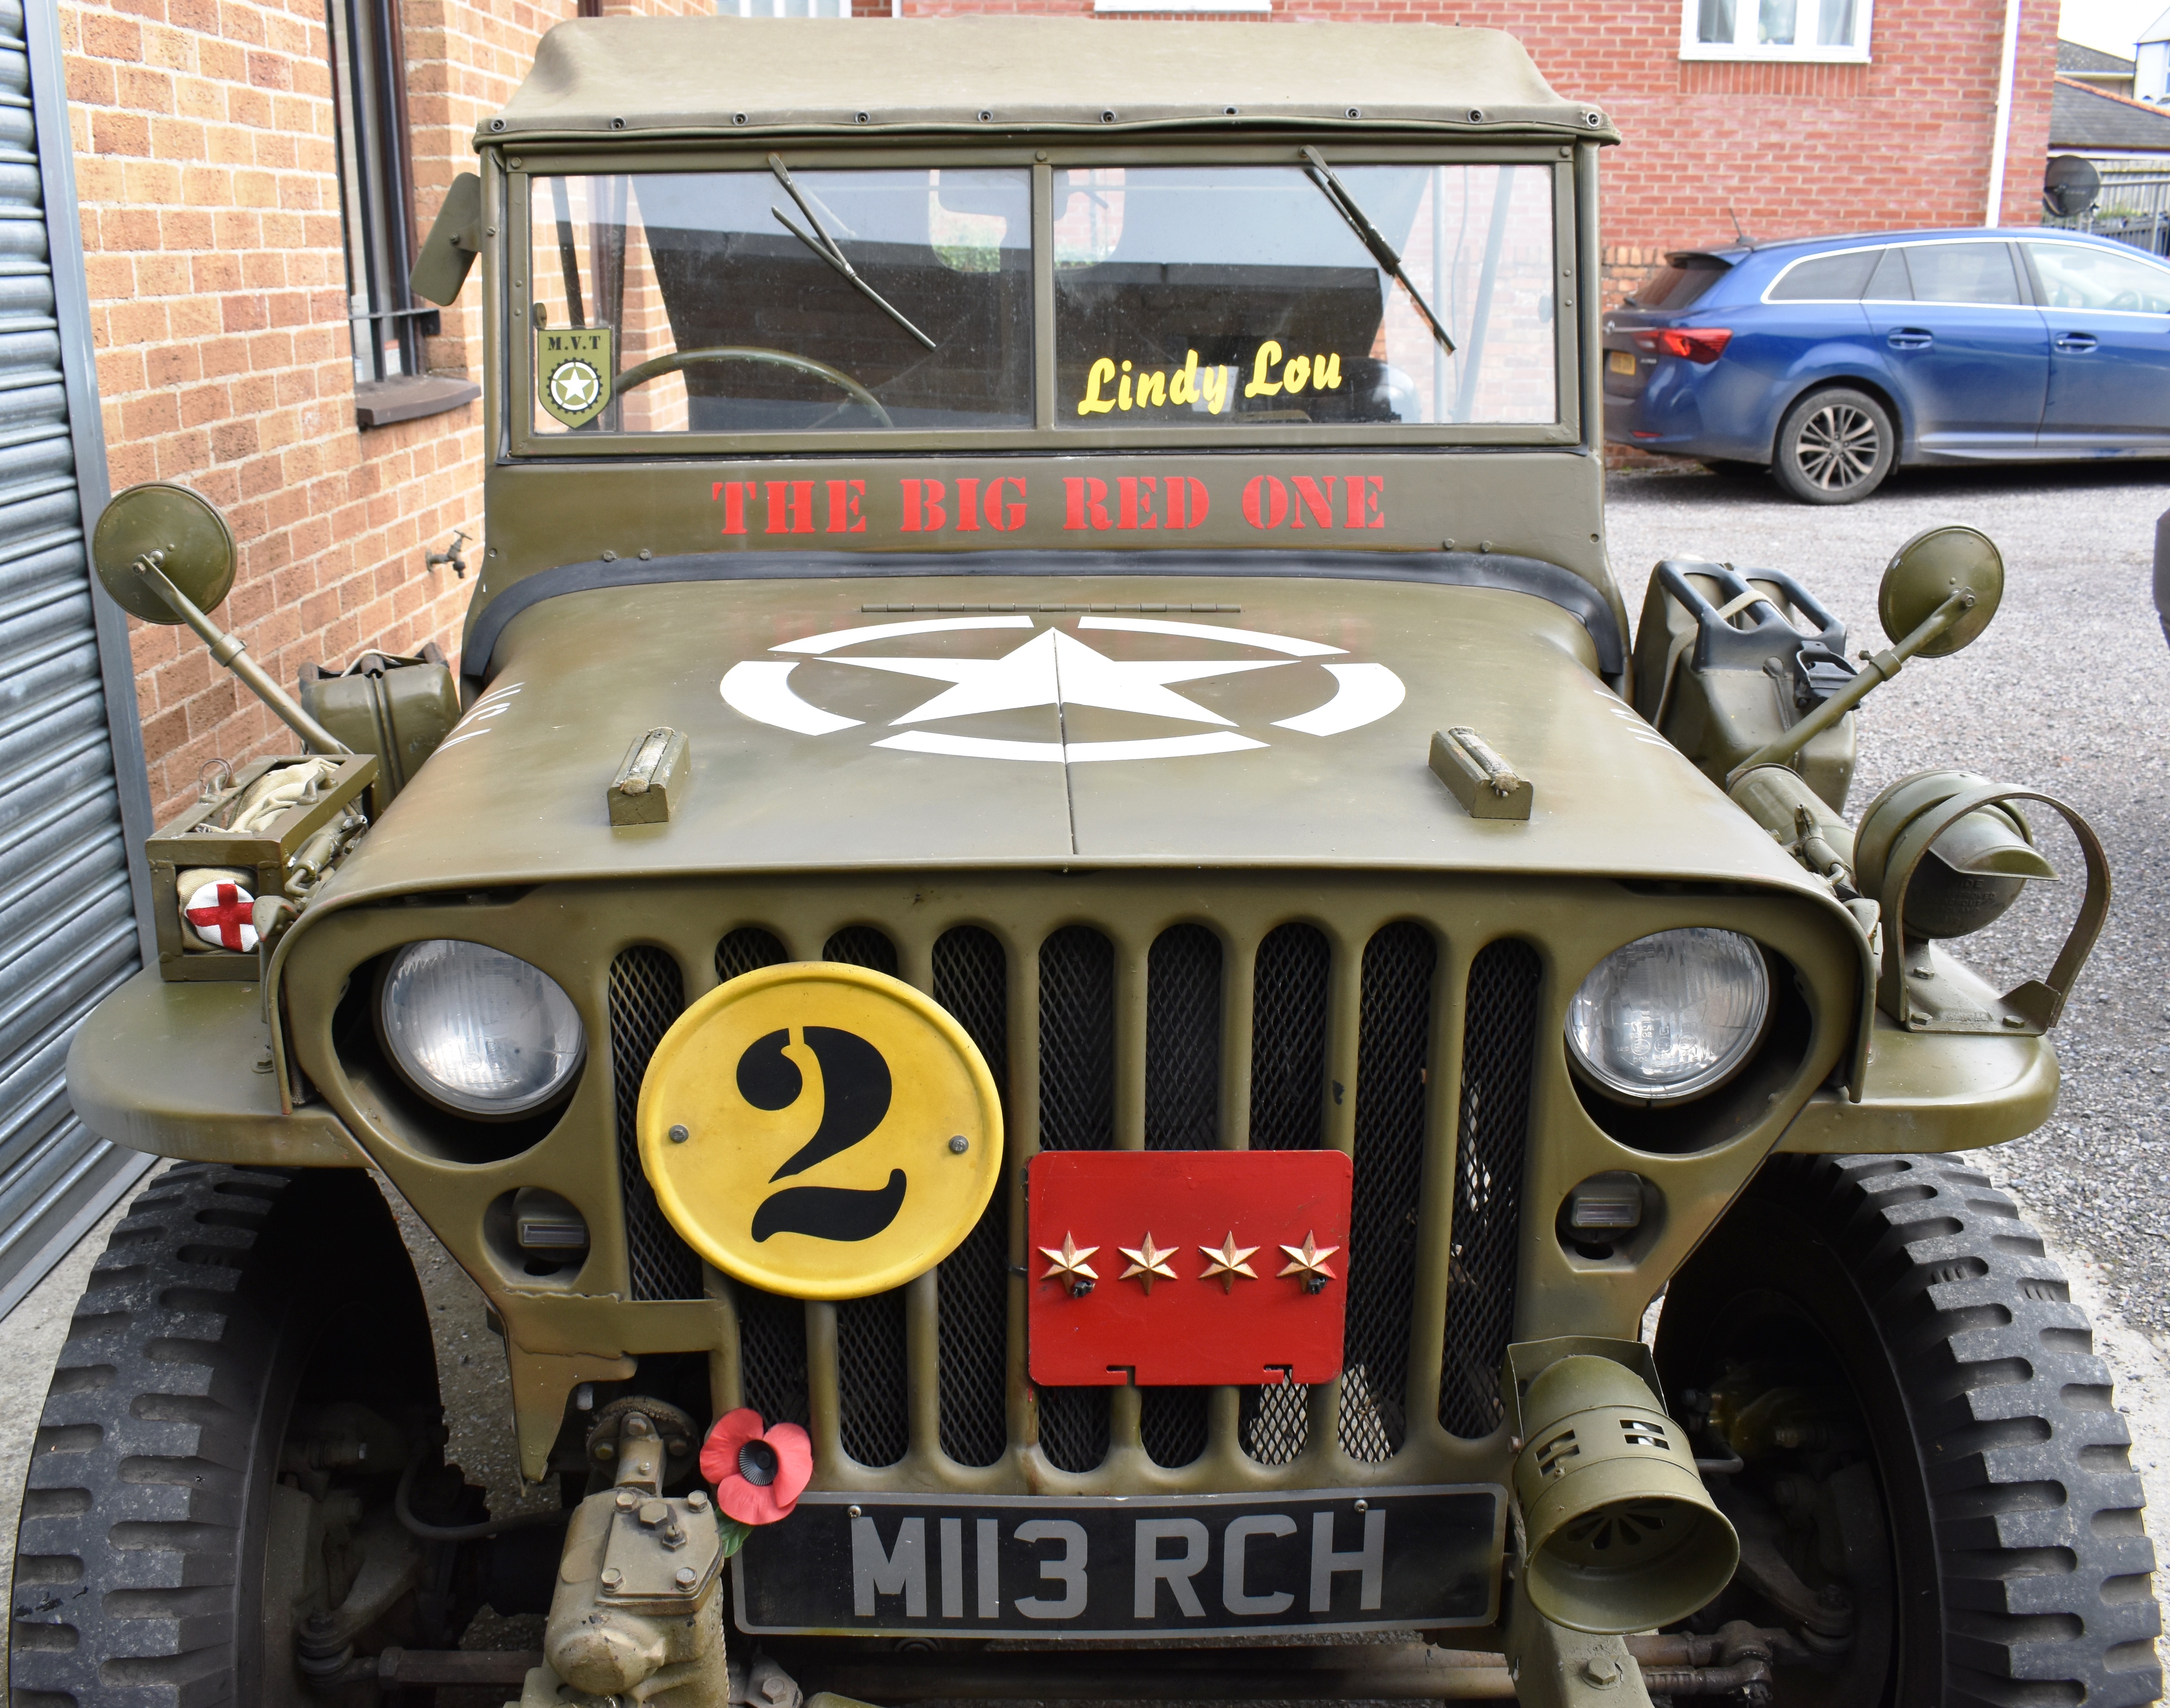 WILLY'S JEEP MB - VEHICLE REGISTRATION NUMBER M113 RCH A Unique Hybrid Replica of a Second World War - Image 4 of 9